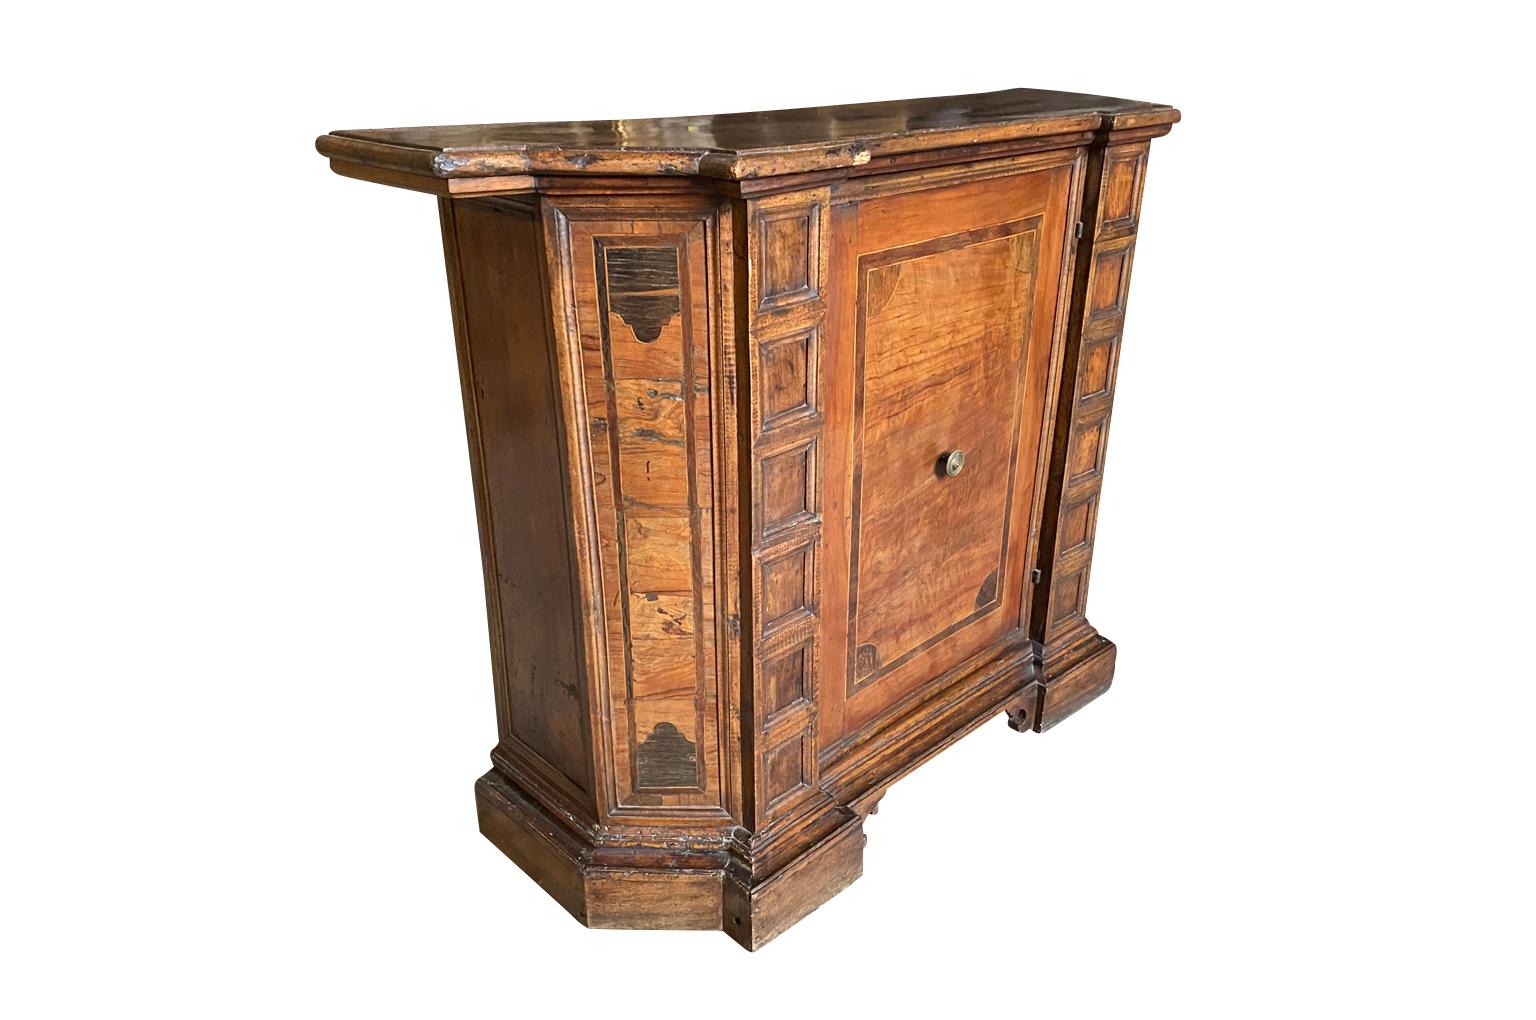 A very striking early 19th century narrow credenza from the Veneto region of Italy. Beautifully constructed from very handsome walnut with canted sides - scantonata - with a single door raised on bracket feet.